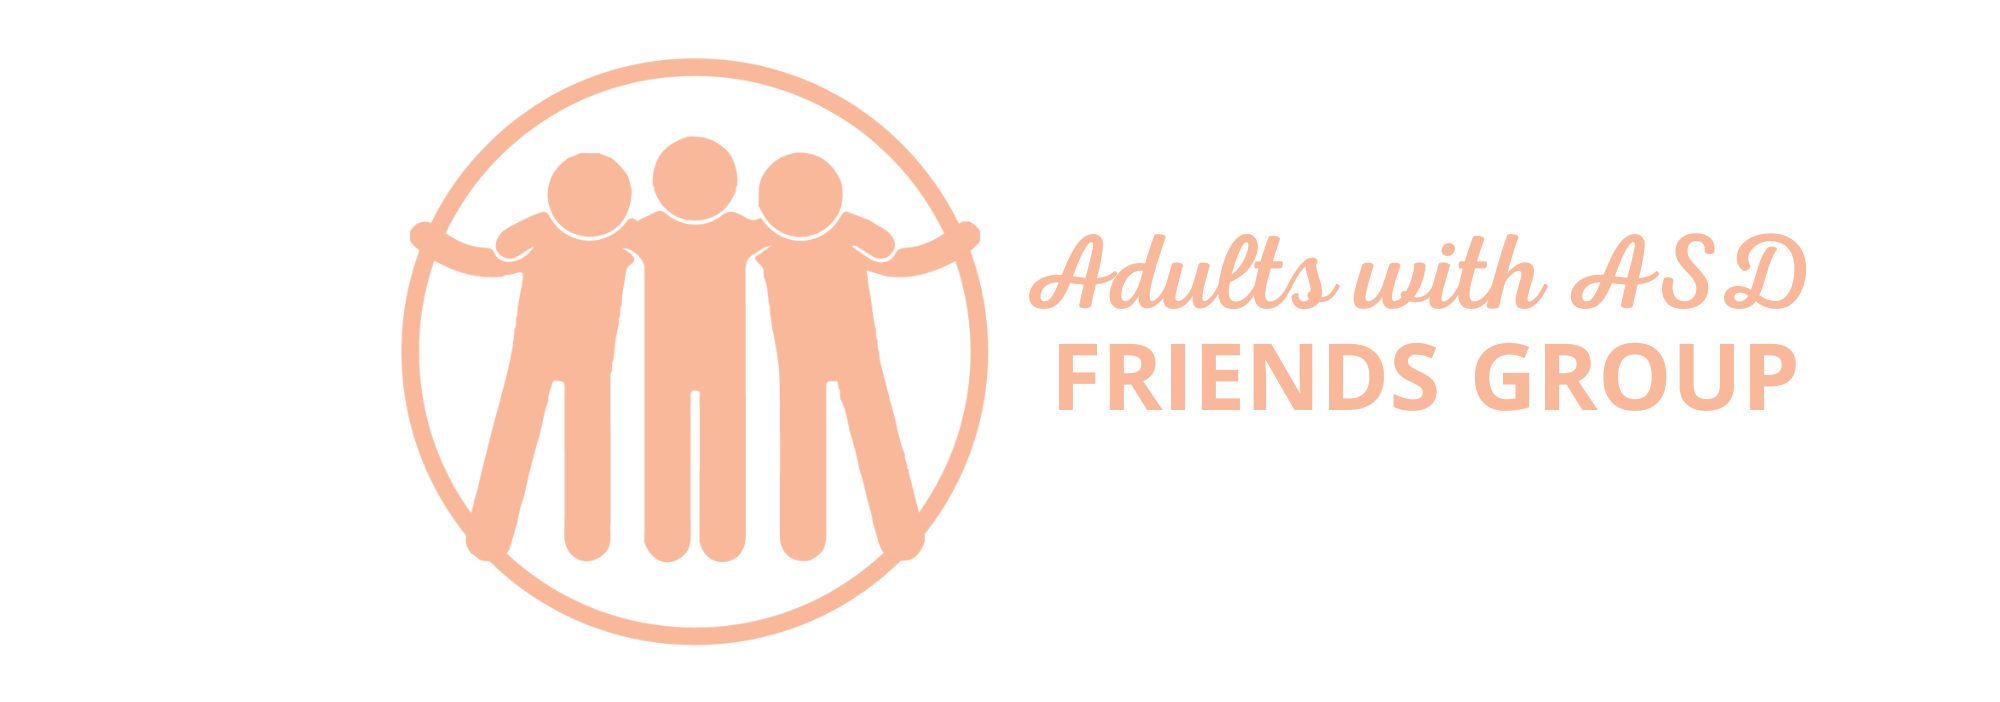 Adults with ASD Friends Group